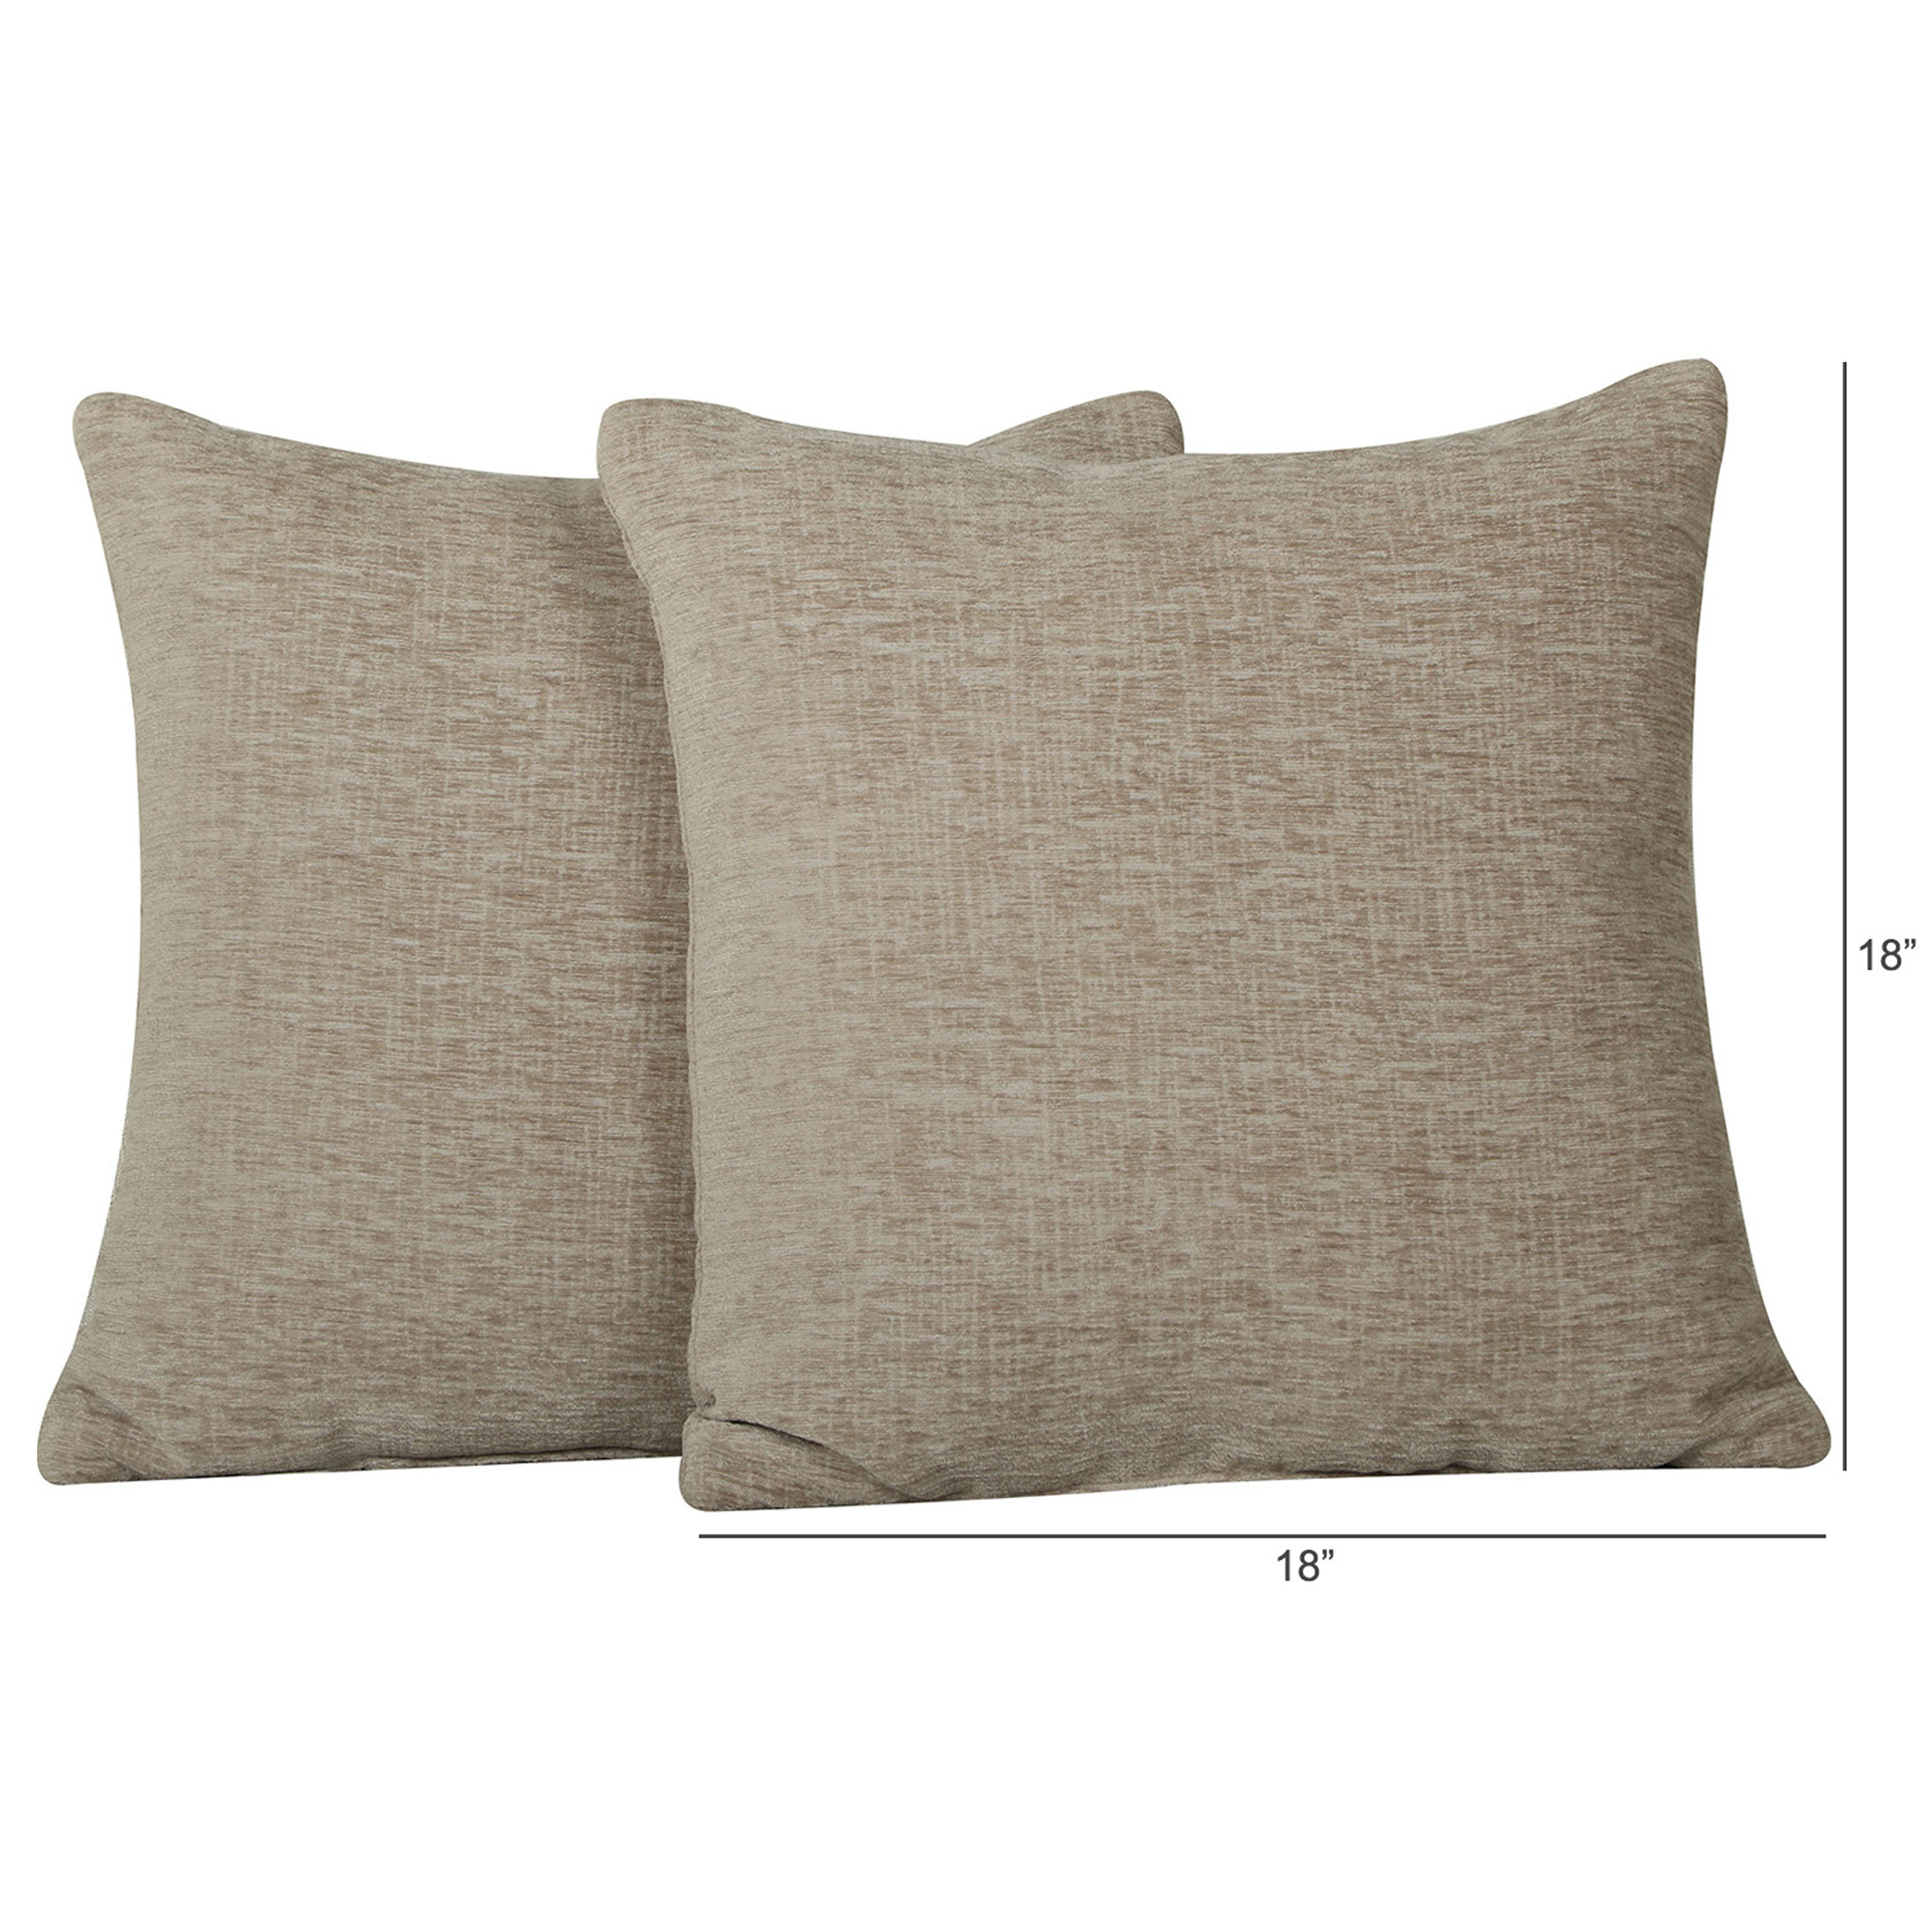 Mainstays Chenille Beige Square Pillow 18''x18'', 2 Pack - image 4 of 5